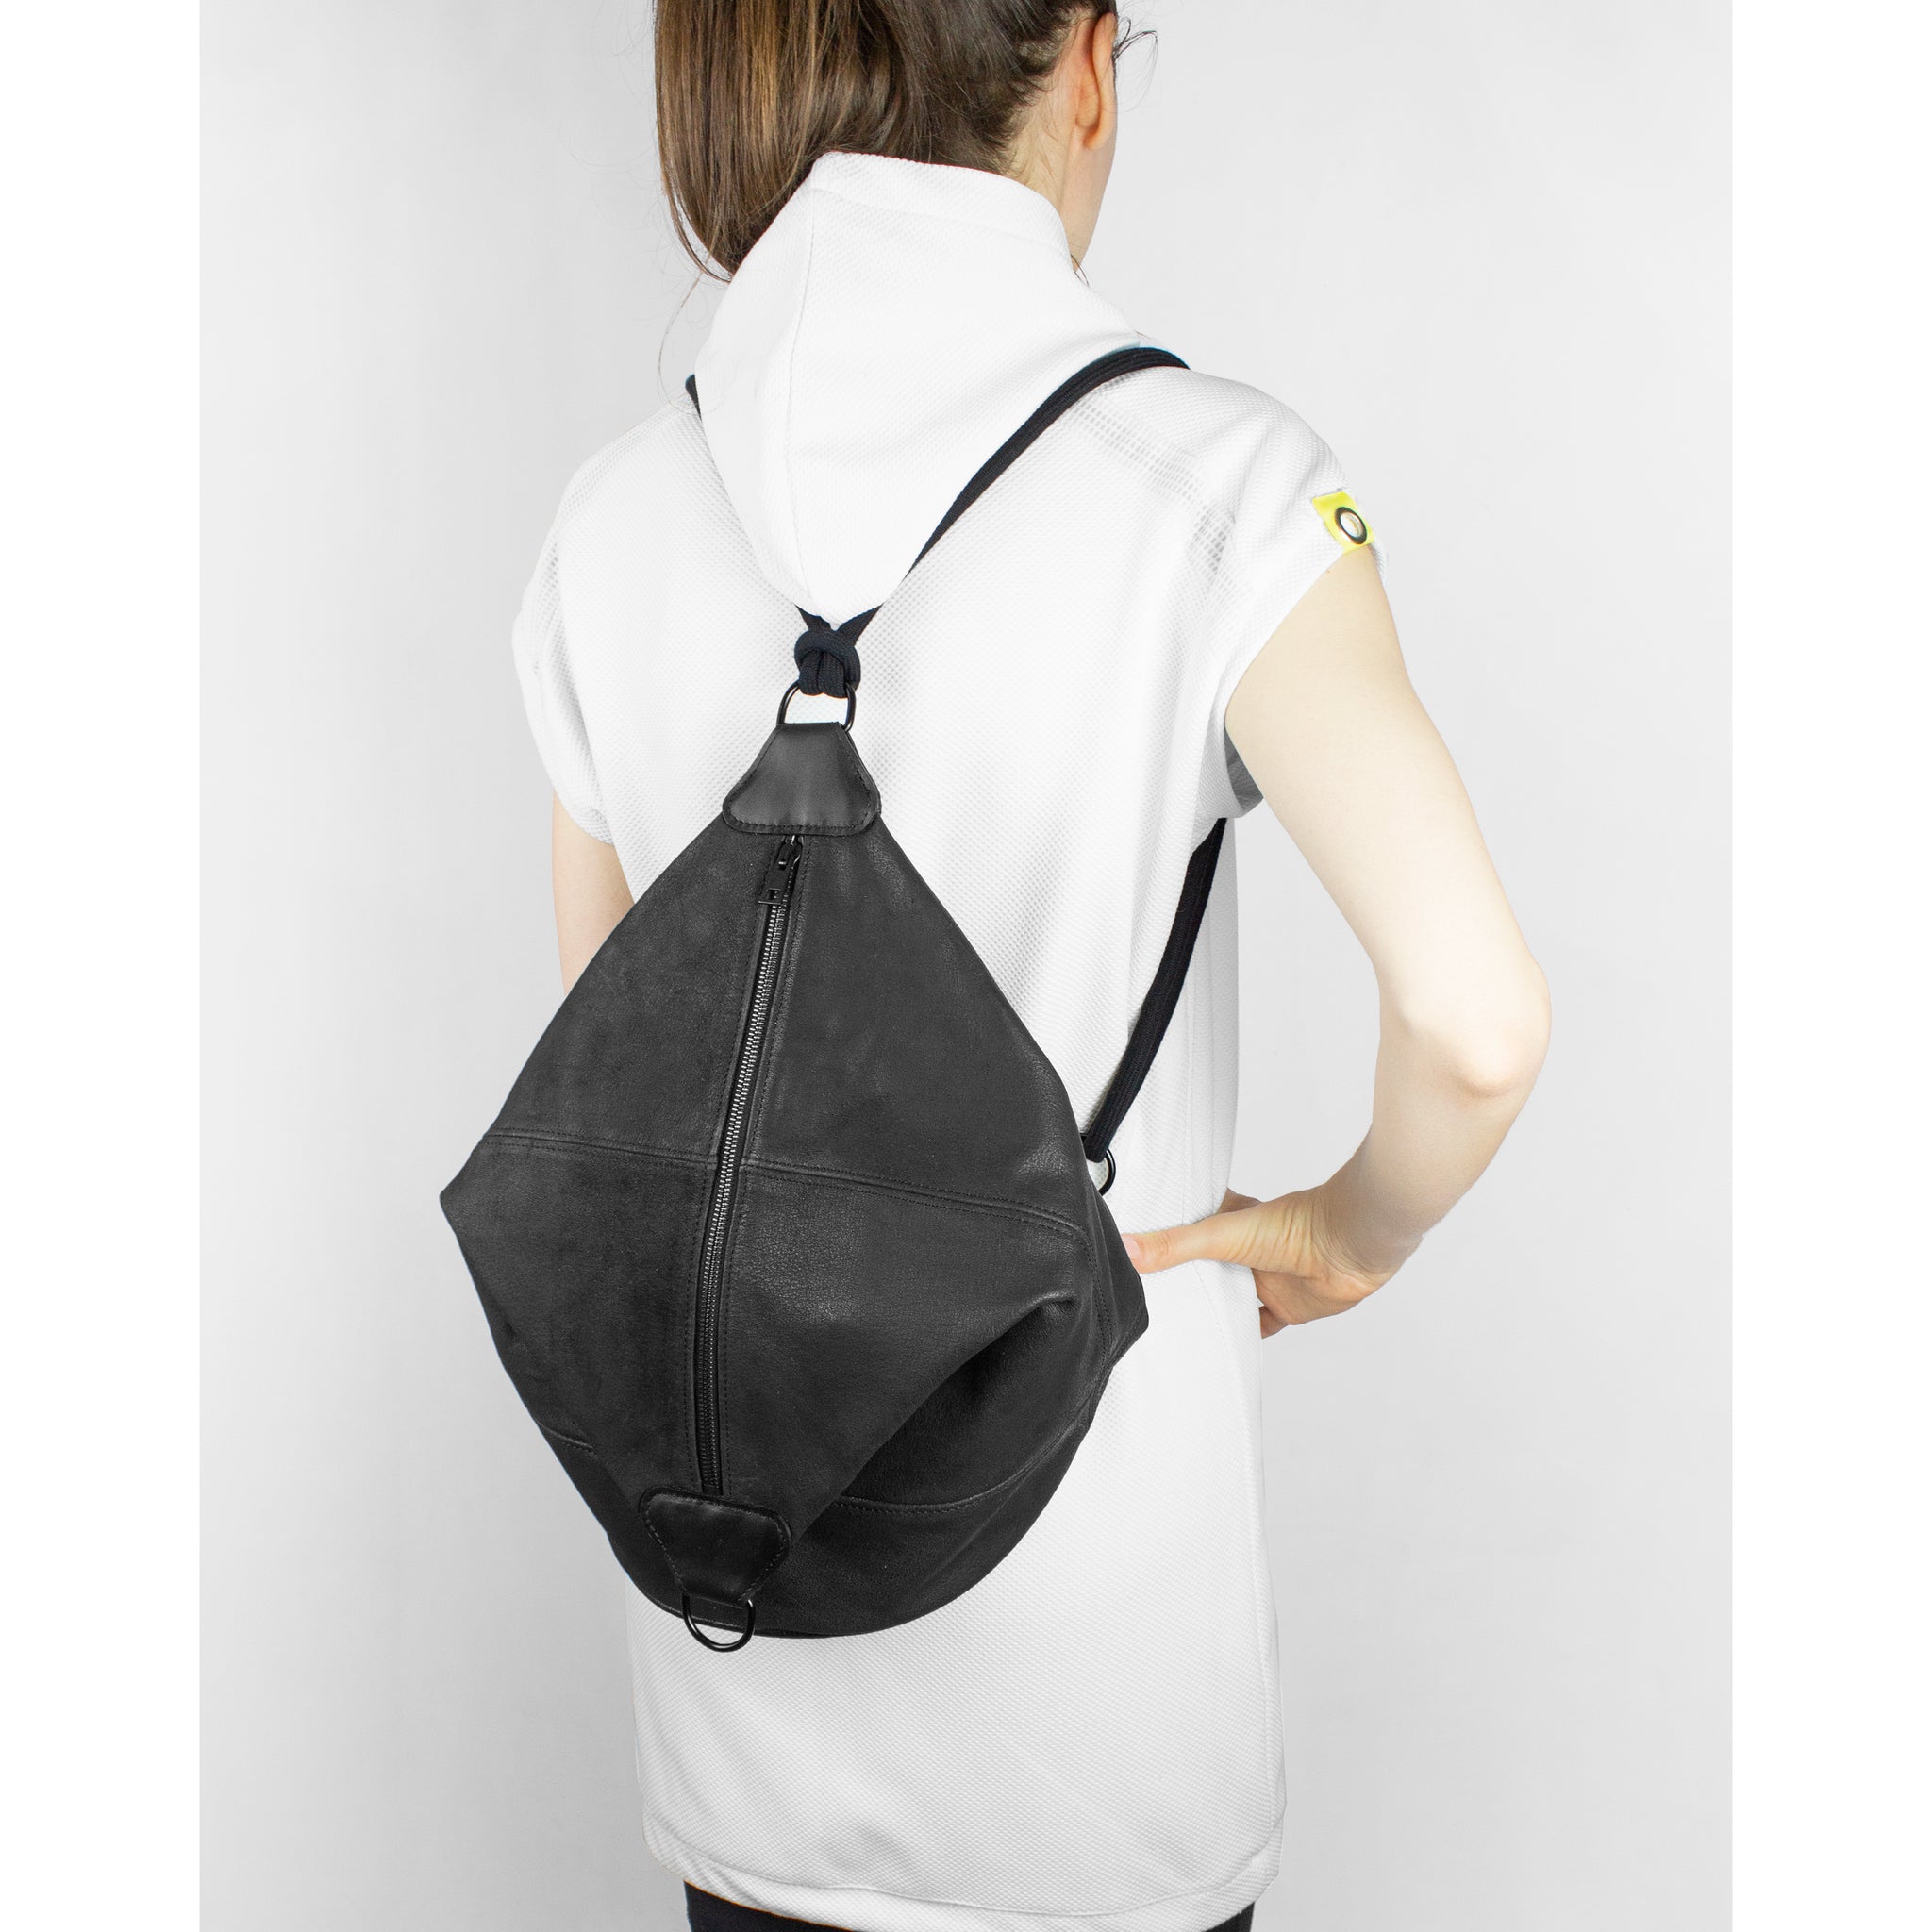 ZION convertible backpack